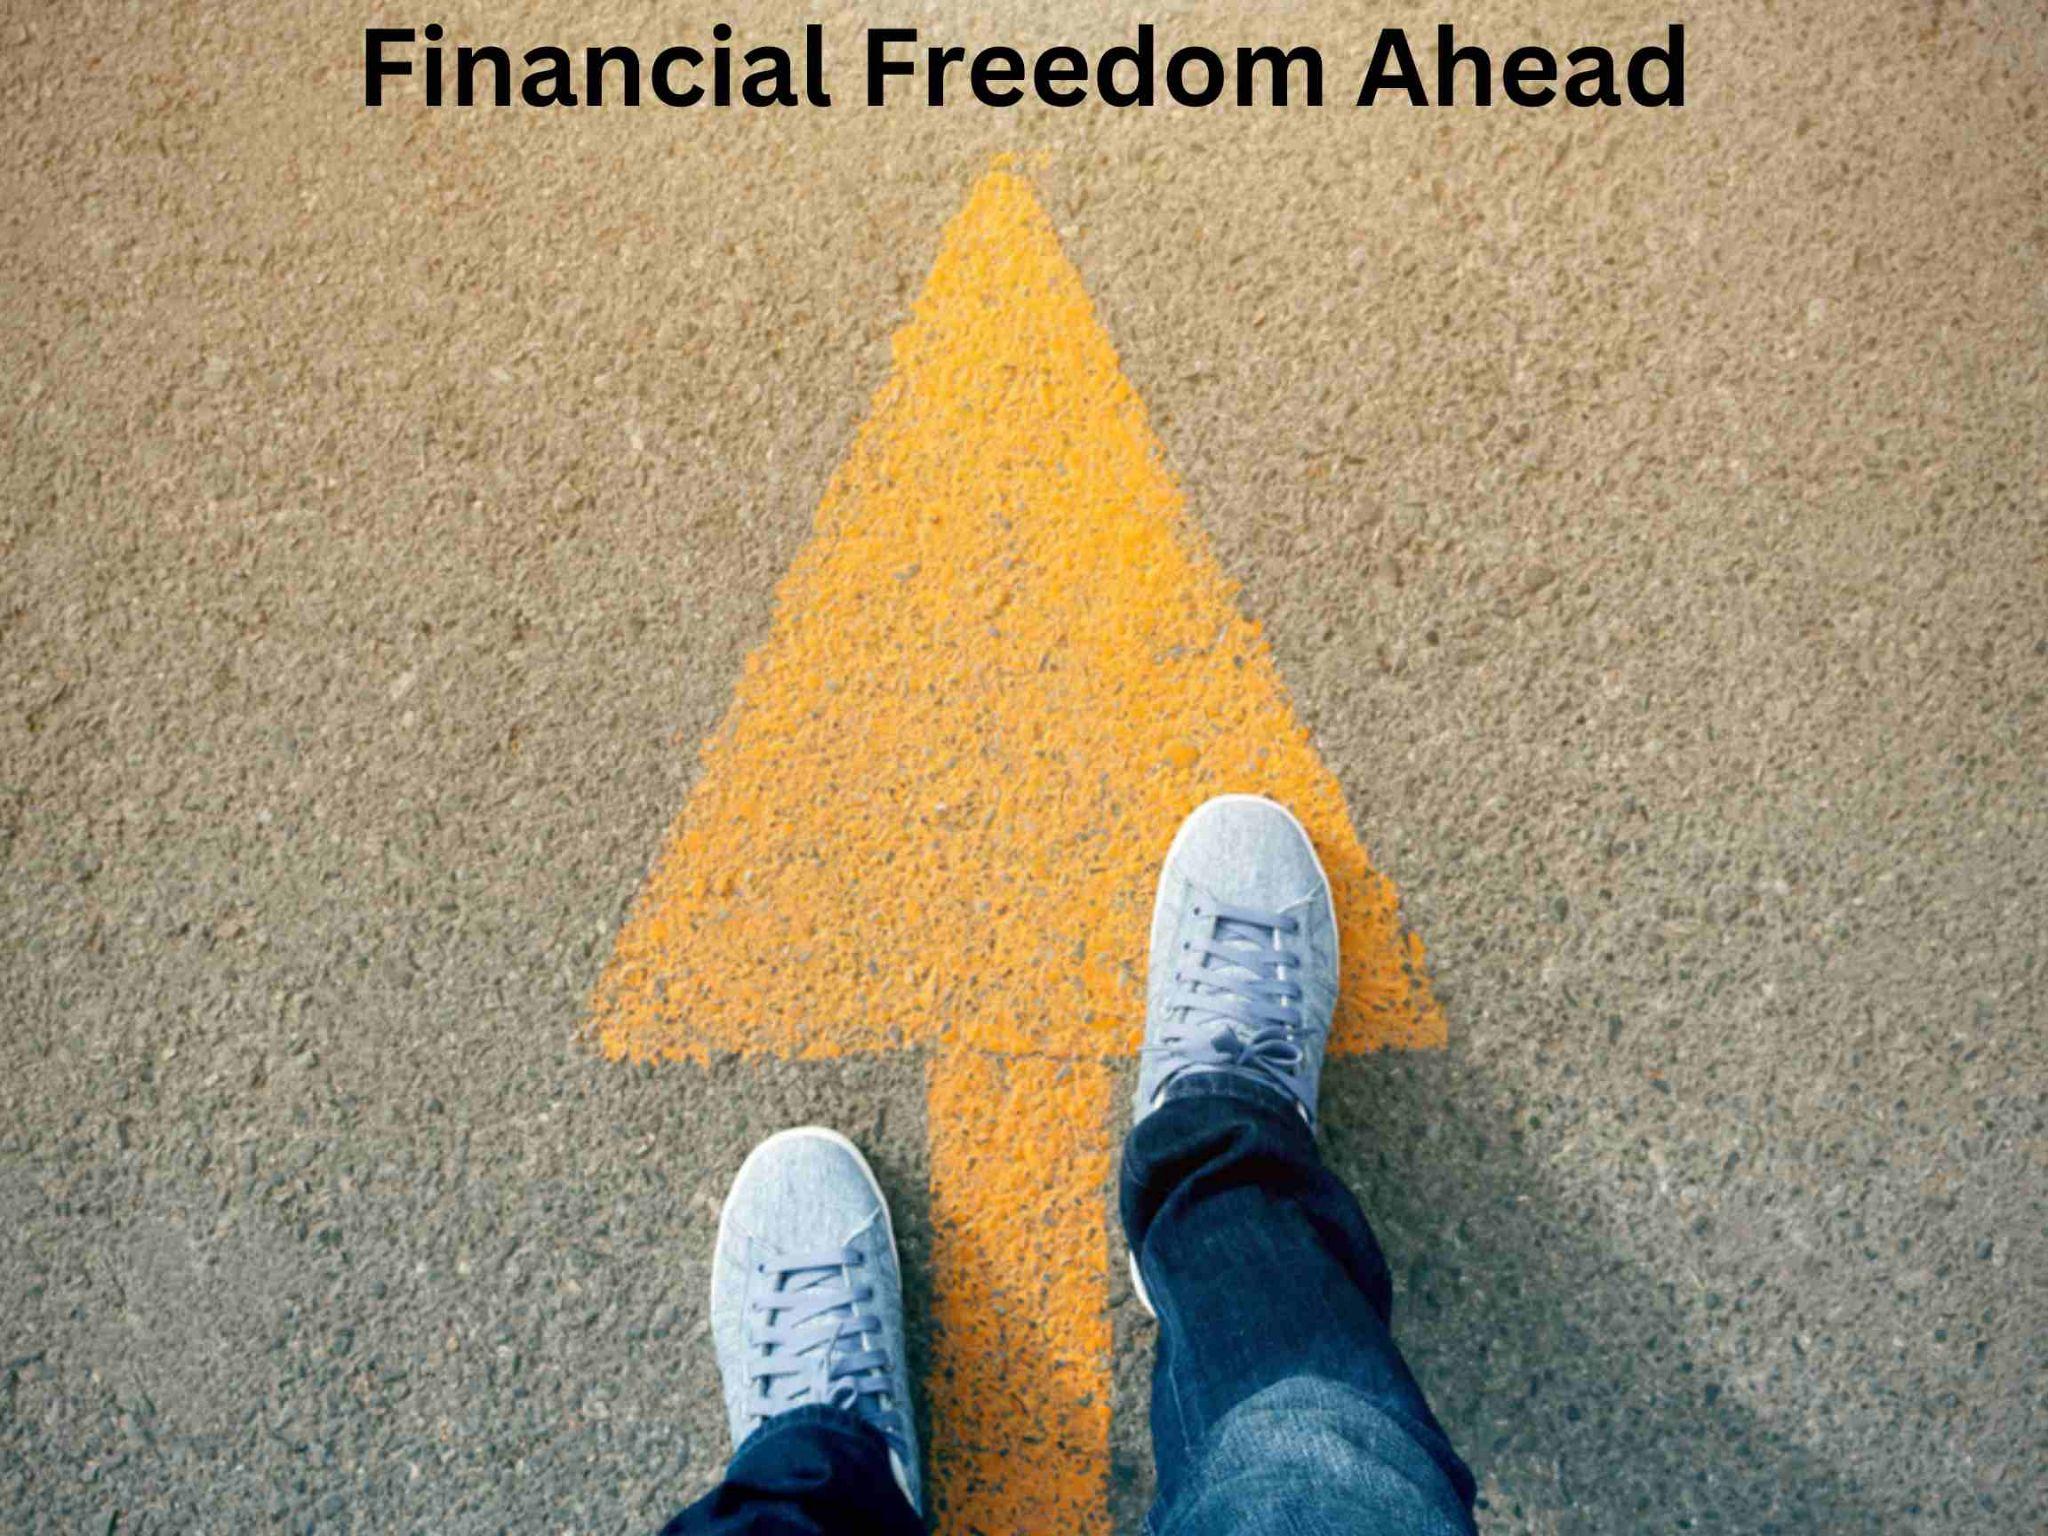 Person standing on a road with an upward pointing arrow painted in yellow, text reads "Weigh Options for Financial Freedom Ahead".